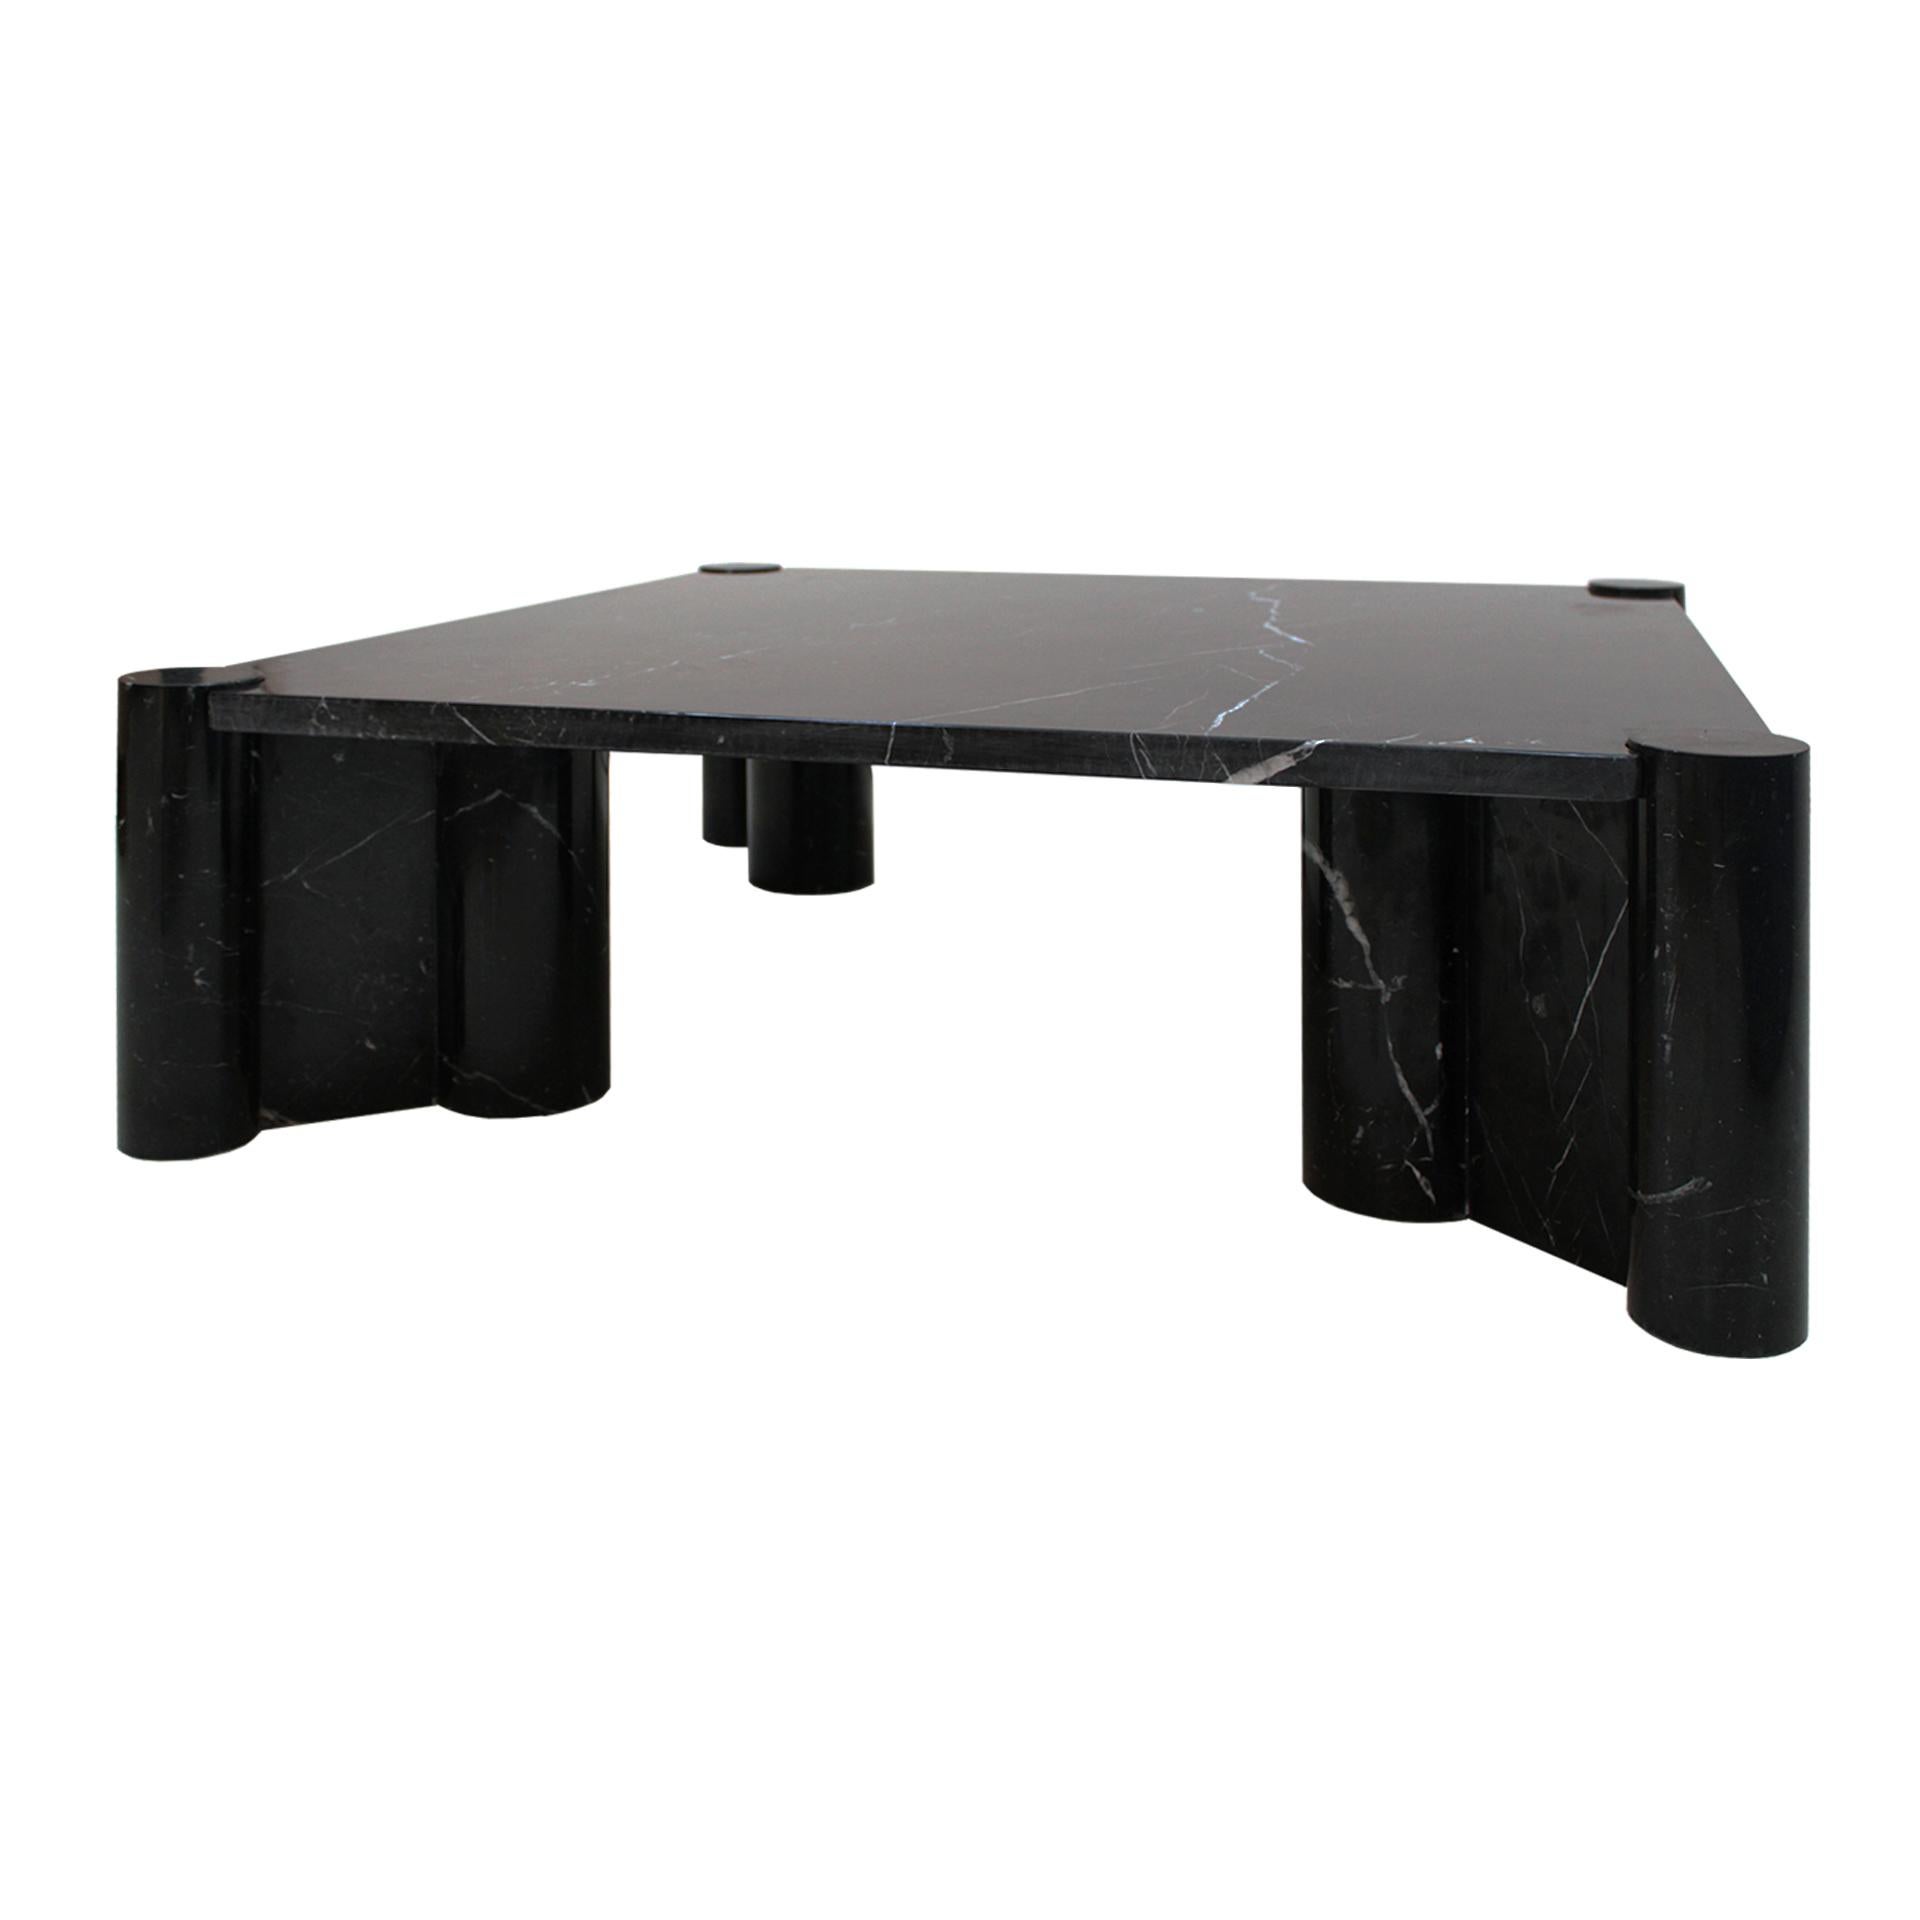 Gae Aulenti for Knoll Made of Black Marble Italian Square Coffee Table 